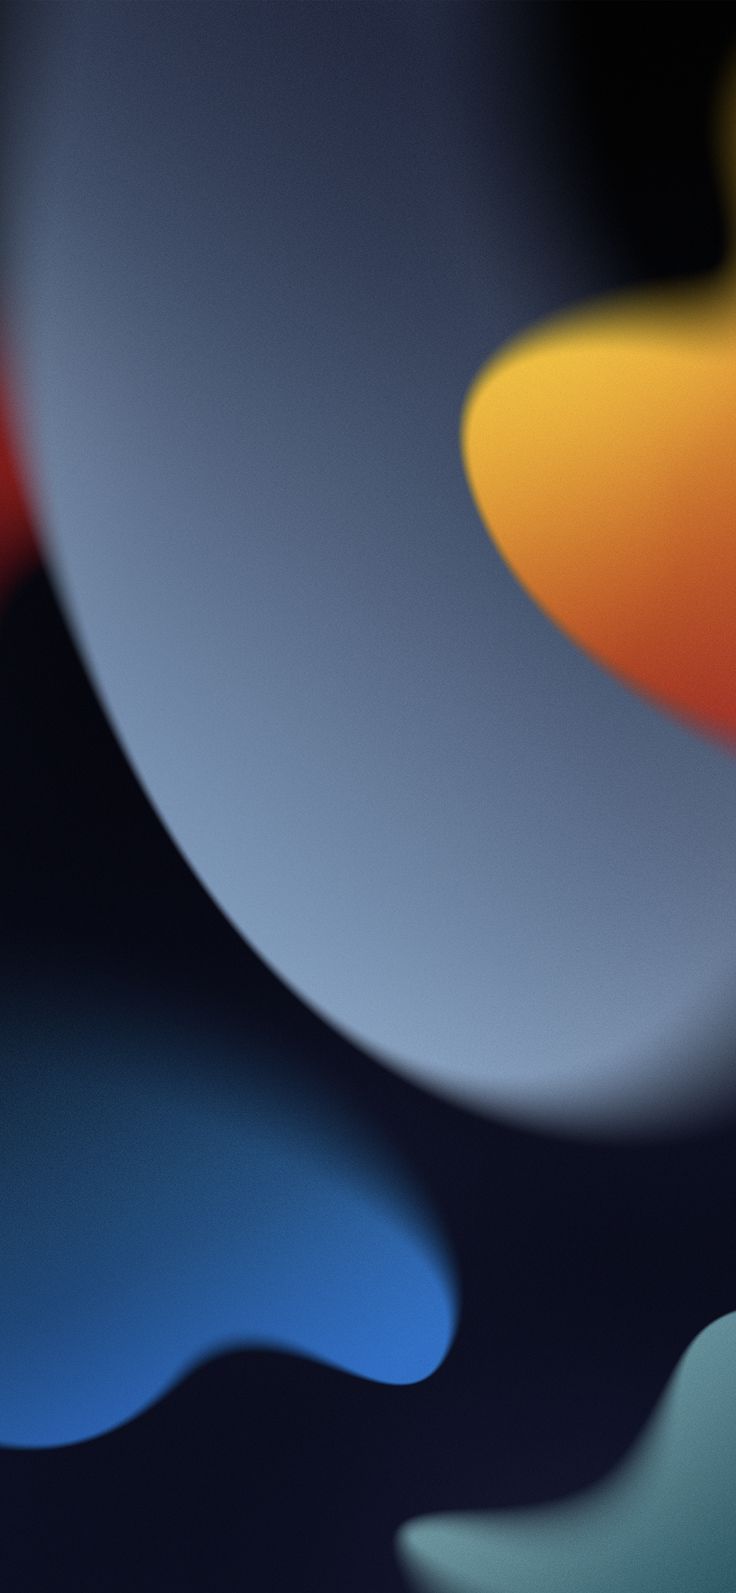 iOS 15 Wallpaper (YTECHB Exclusive). iPhone homescreen wallpaper, Motorola wallpaper, Apple wallpaper iphone